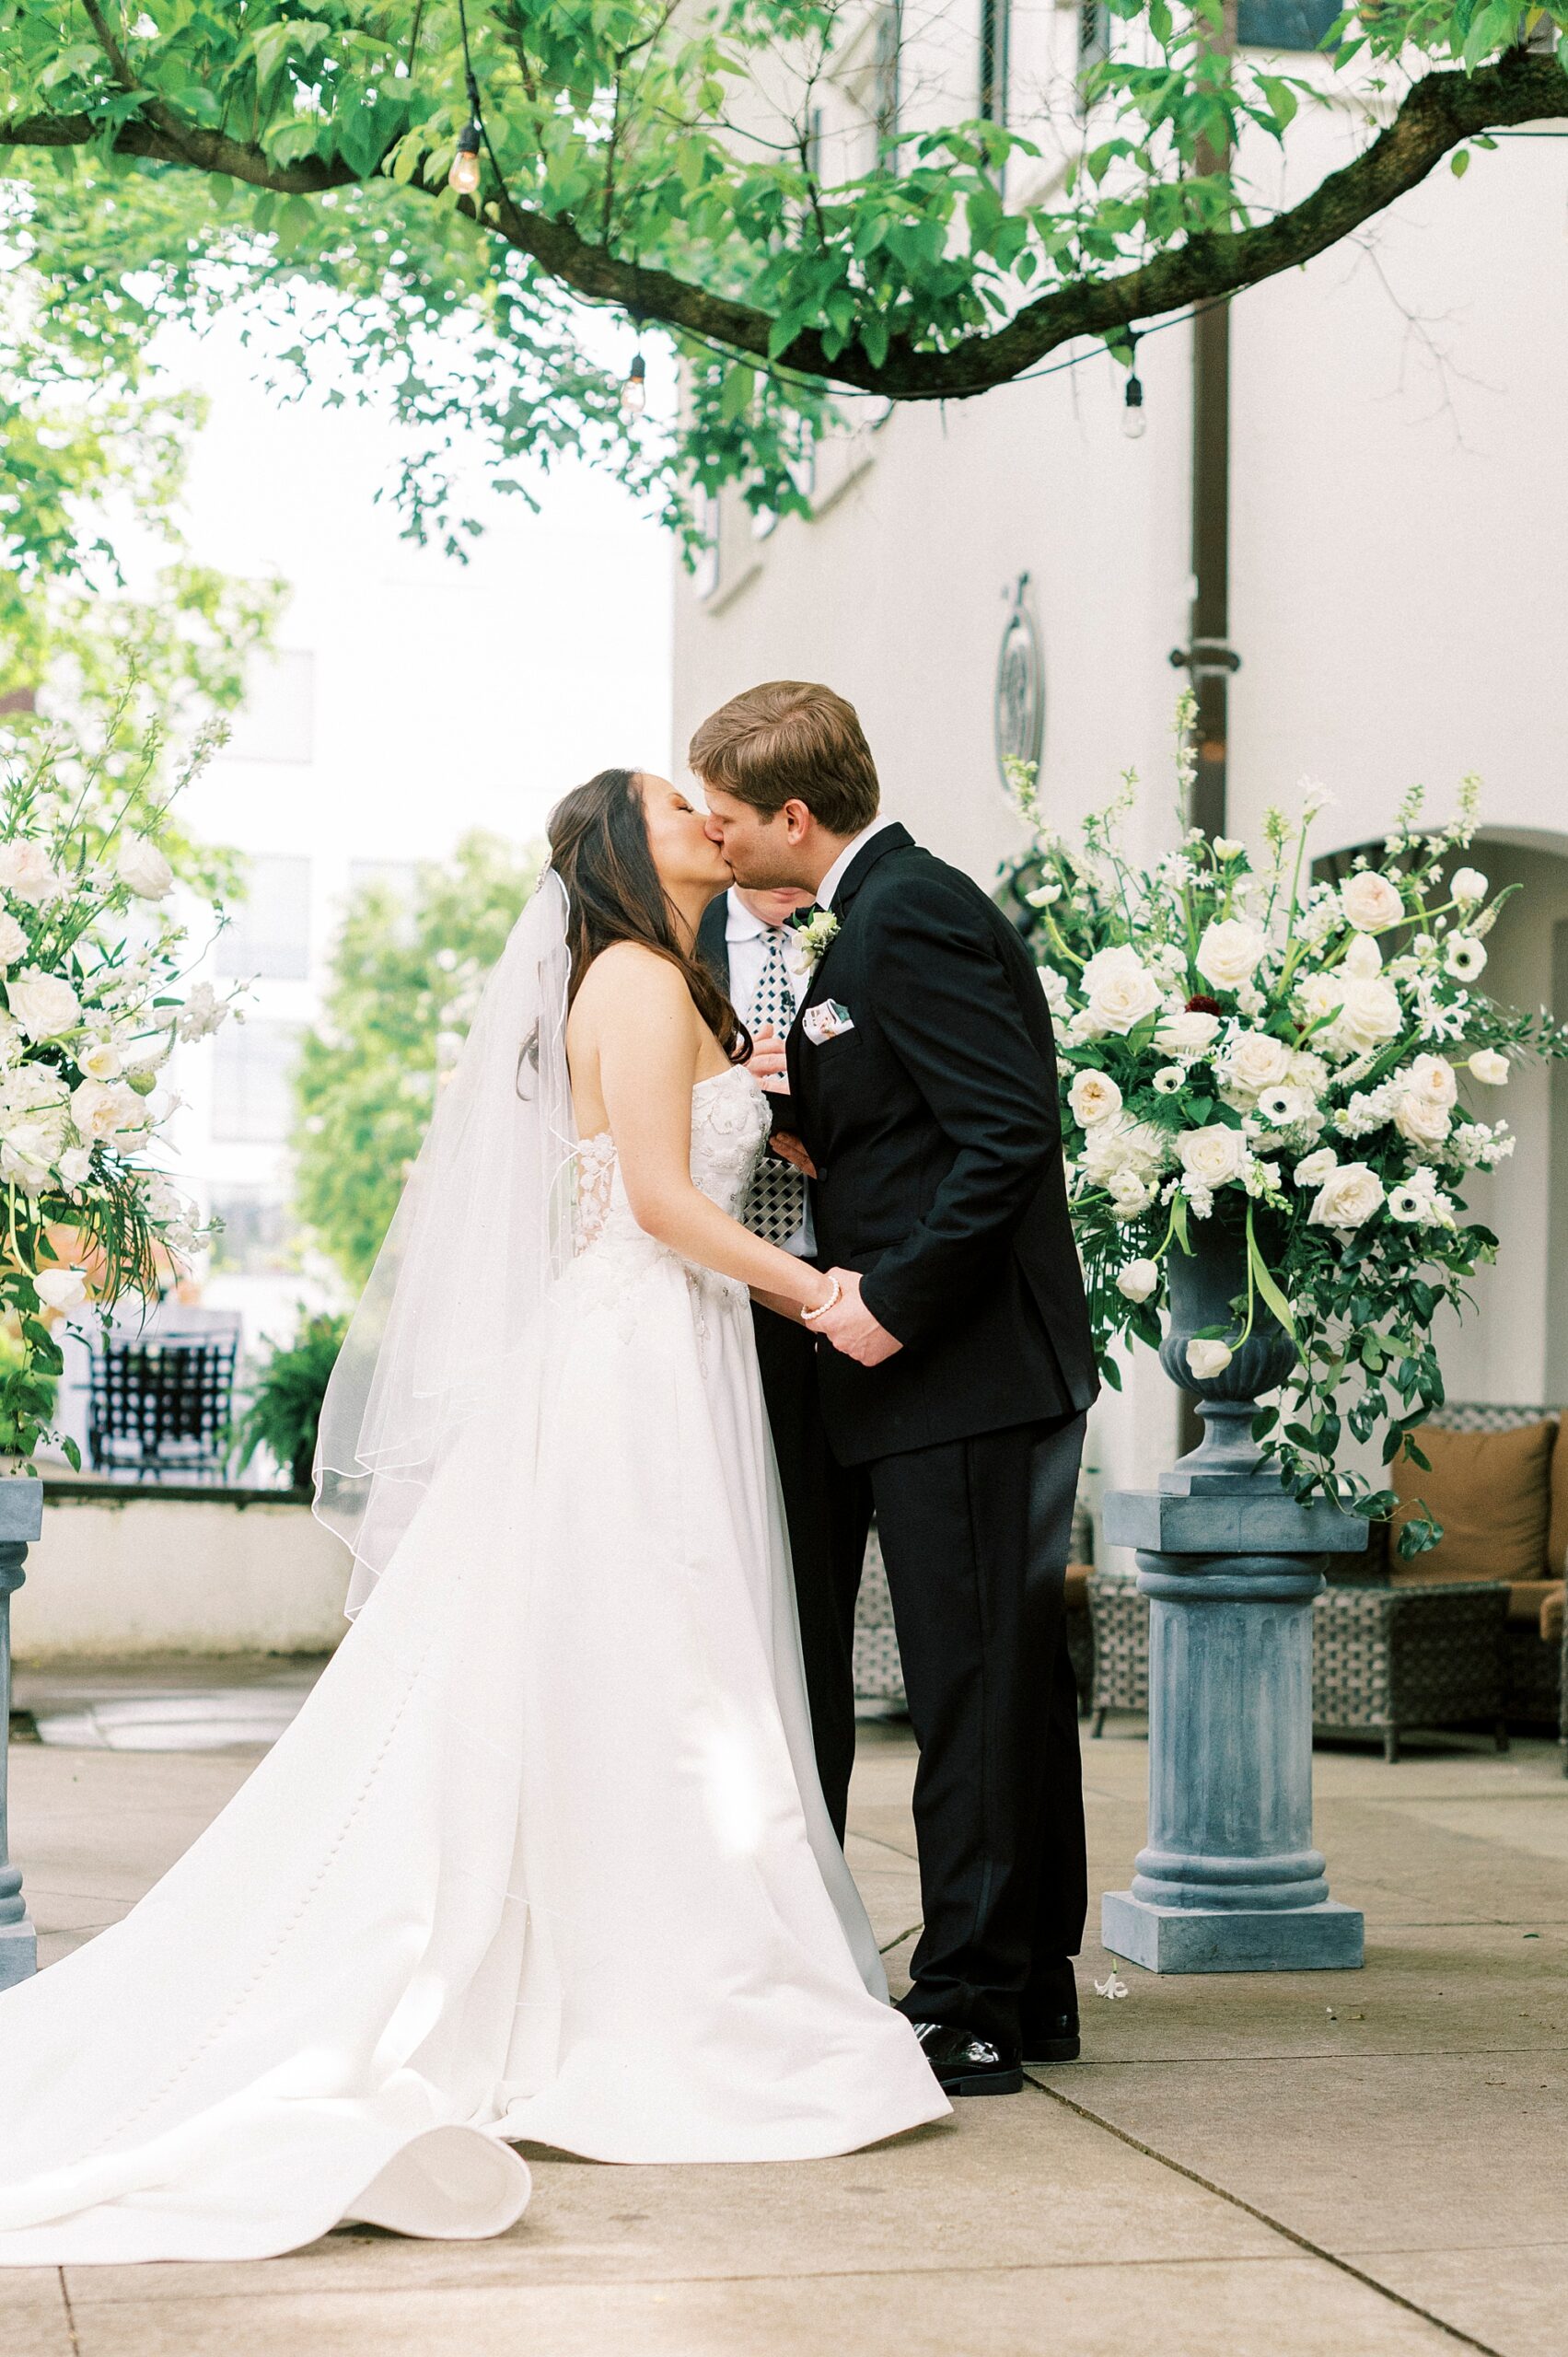 newlyweds lean for kiss during ceremony at The Spring House